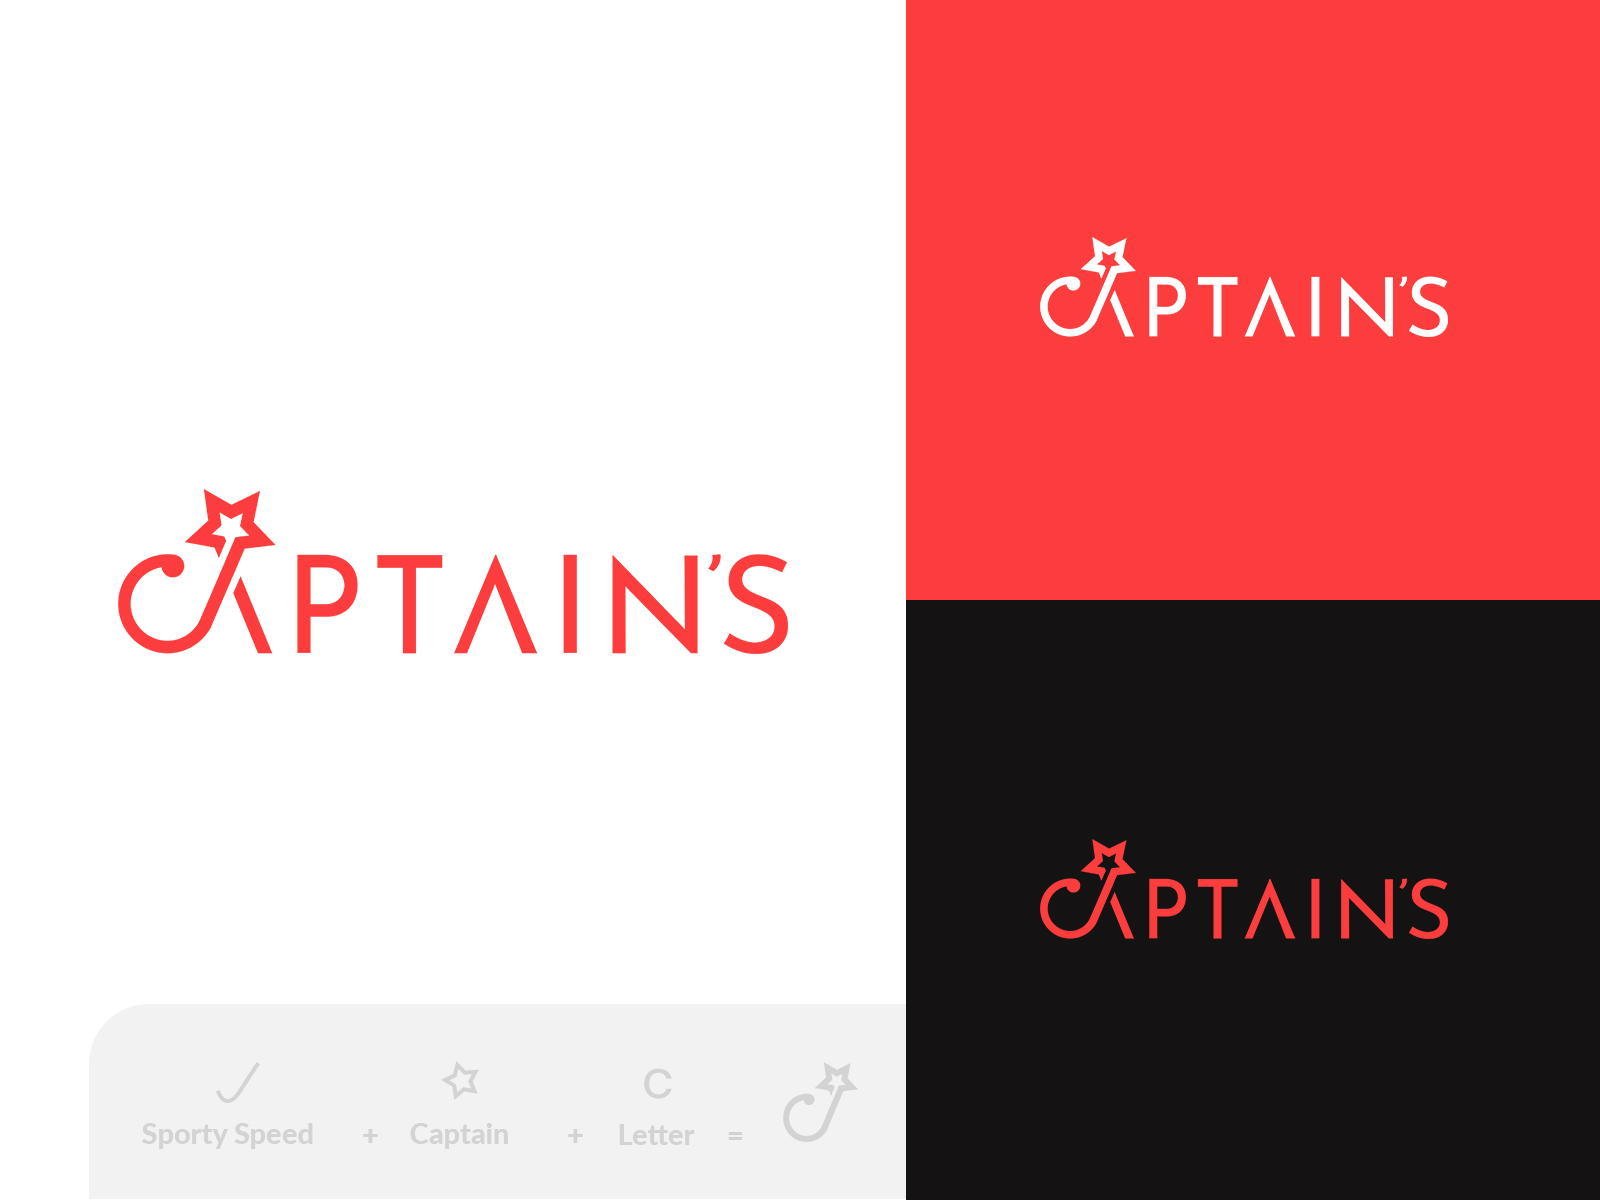 Captain Text Effect and Logo Design Word